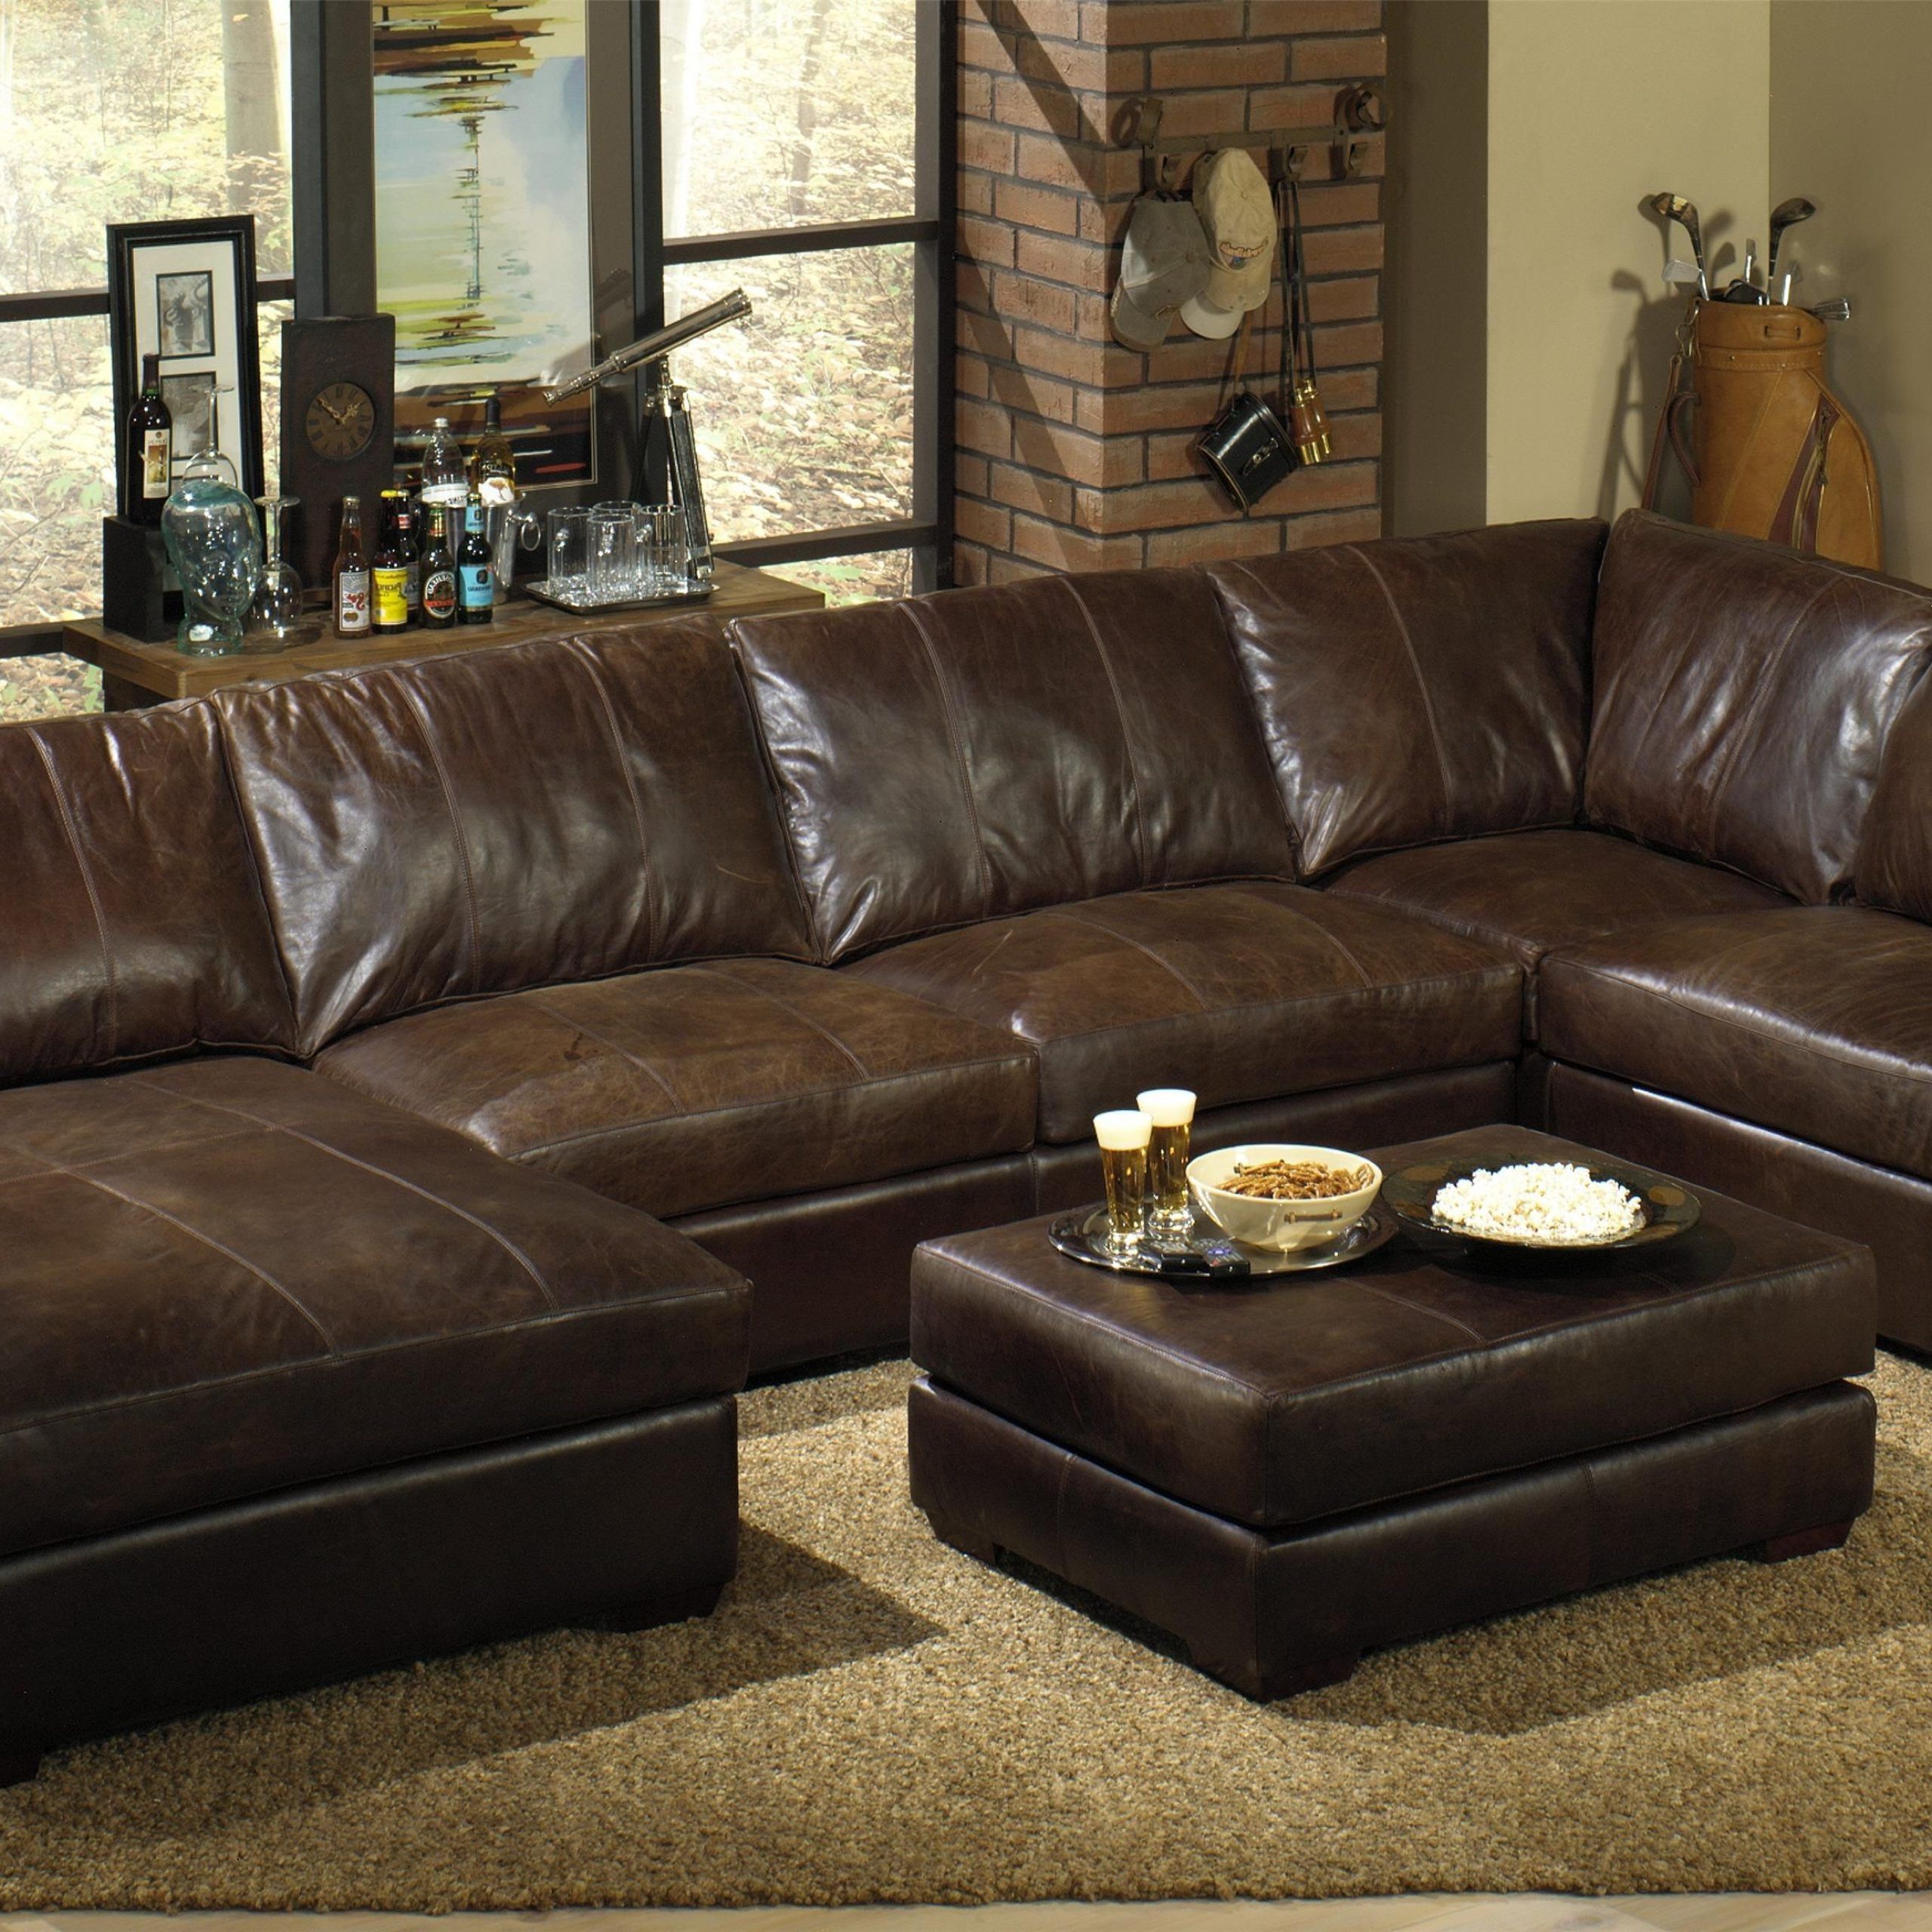 Leather Sectional Sofa – Sofas Design Ideas Throughout Best And Newest 3 Piece Leather Sectional Sofa Sets (View 12 of 15)